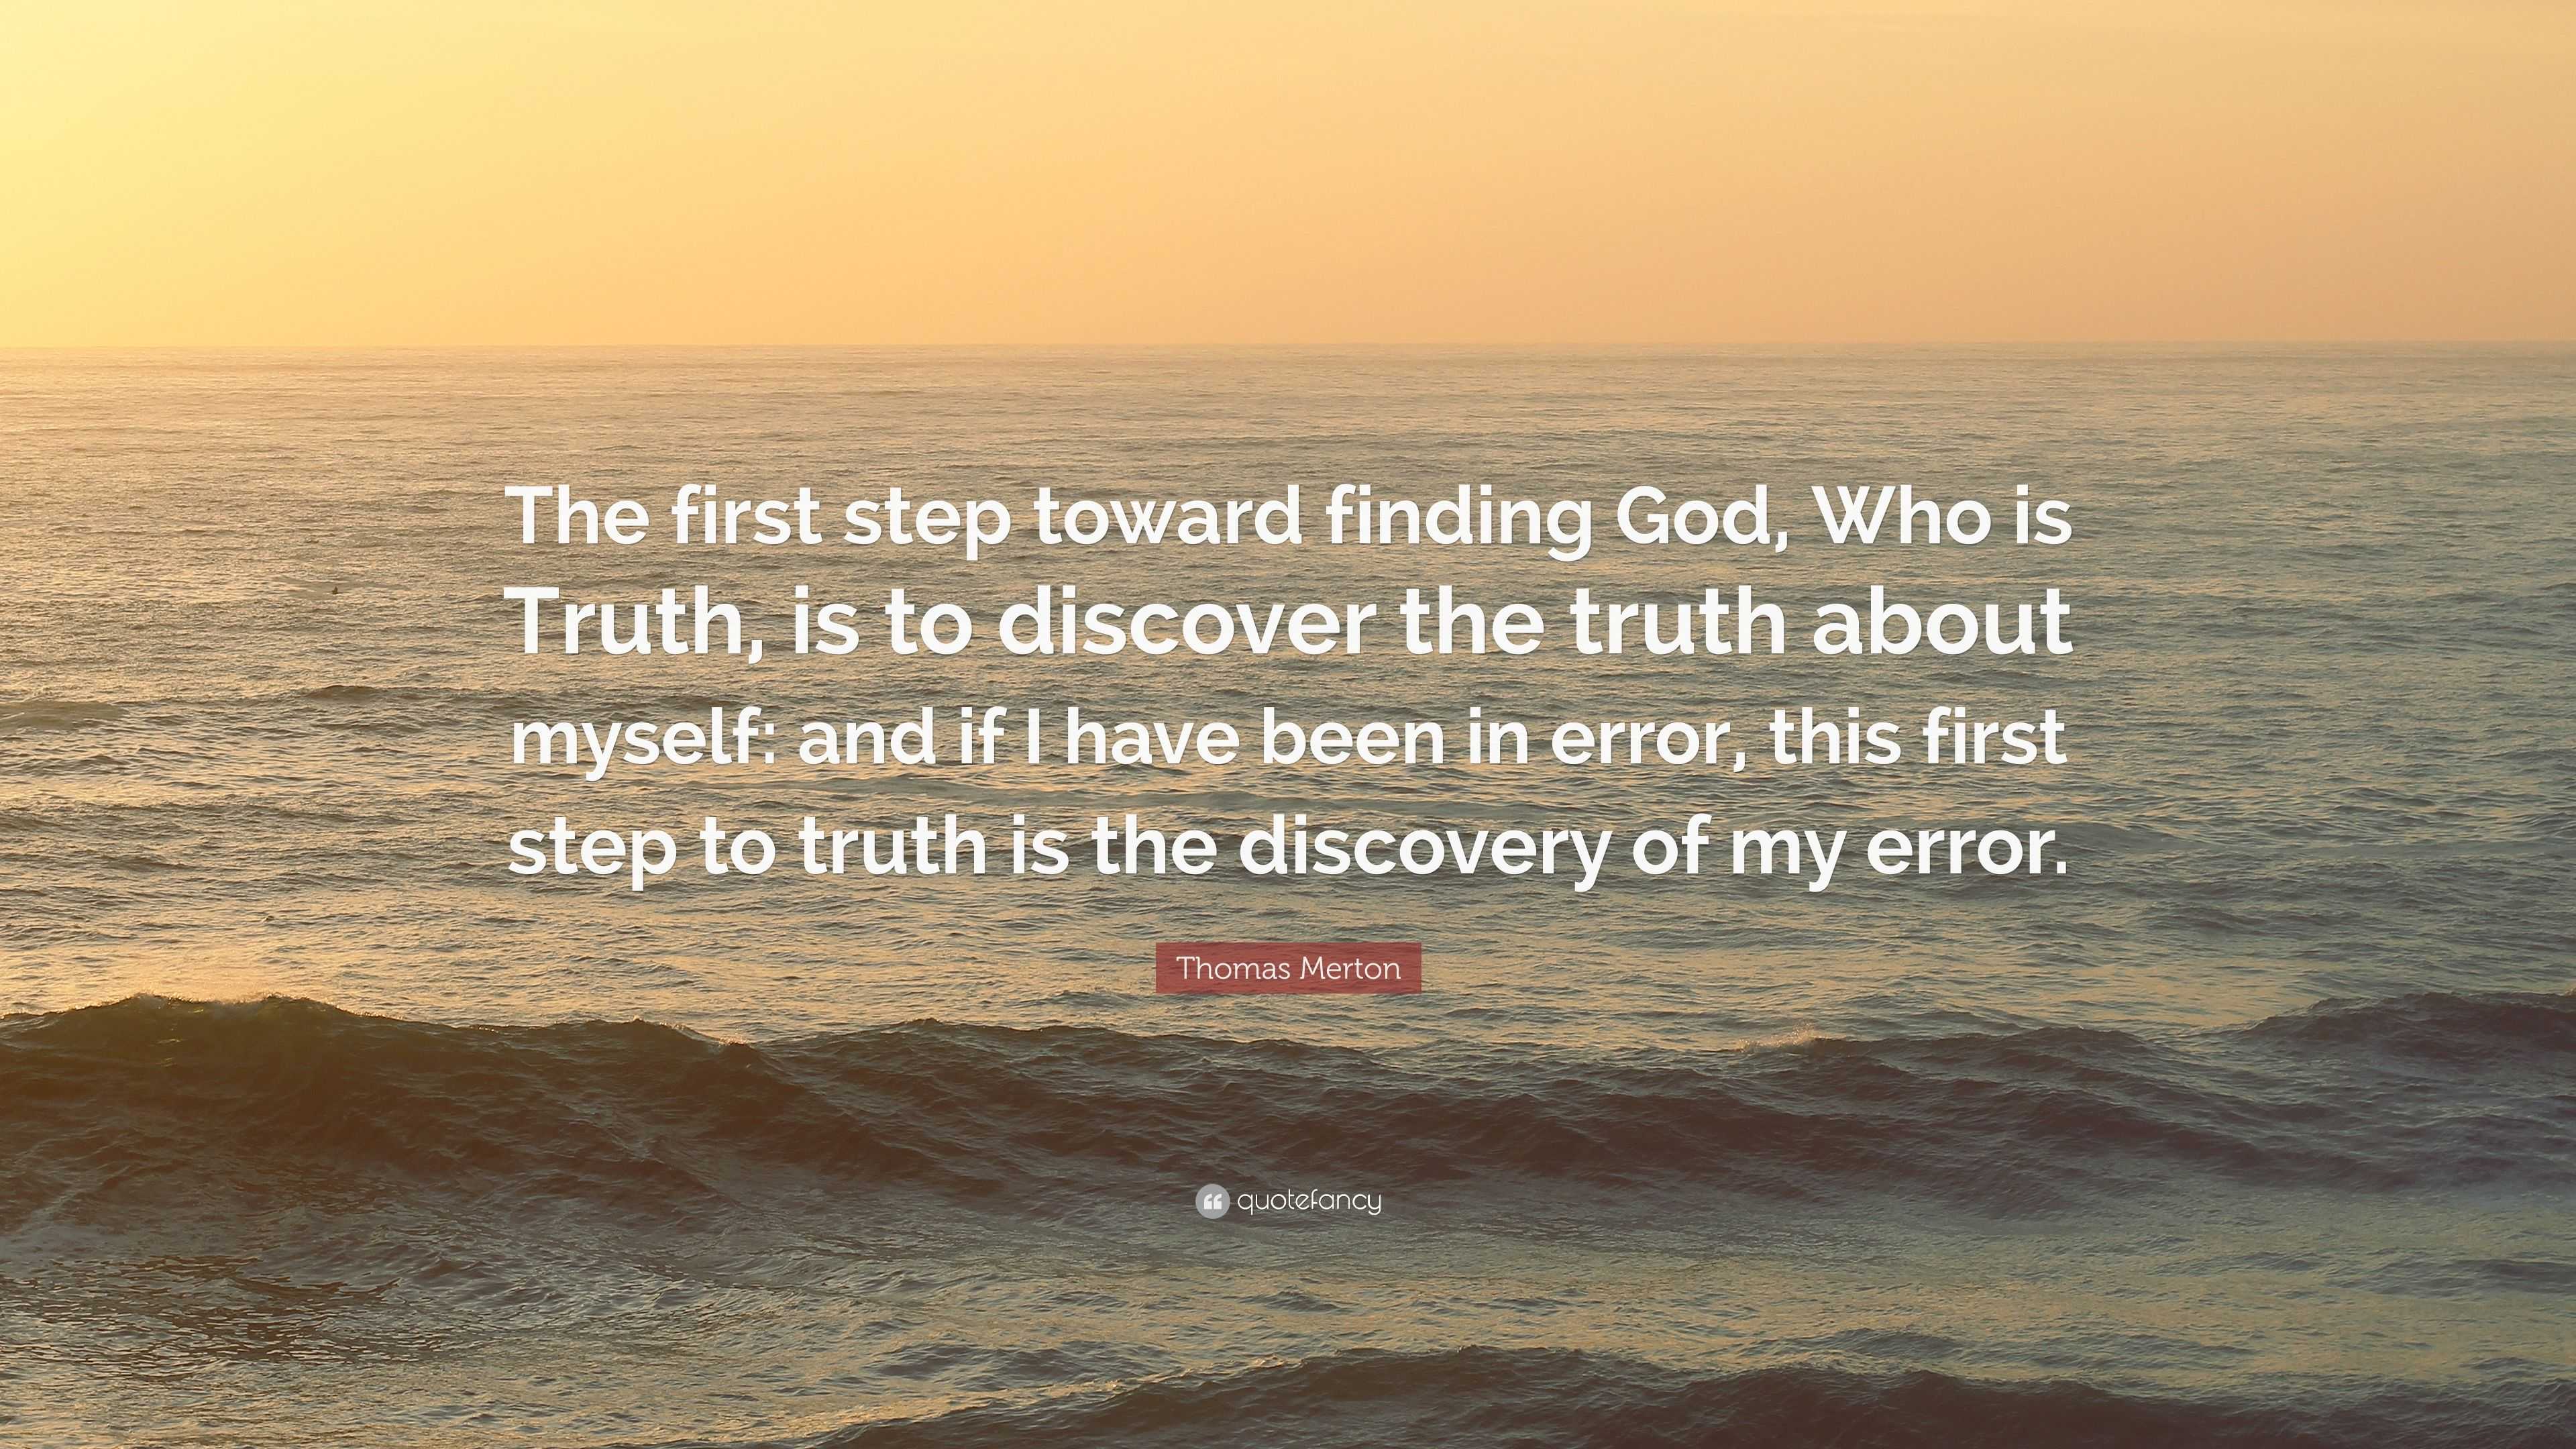 Thomas Merton Quote: “The first step toward finding God, Who is Truth